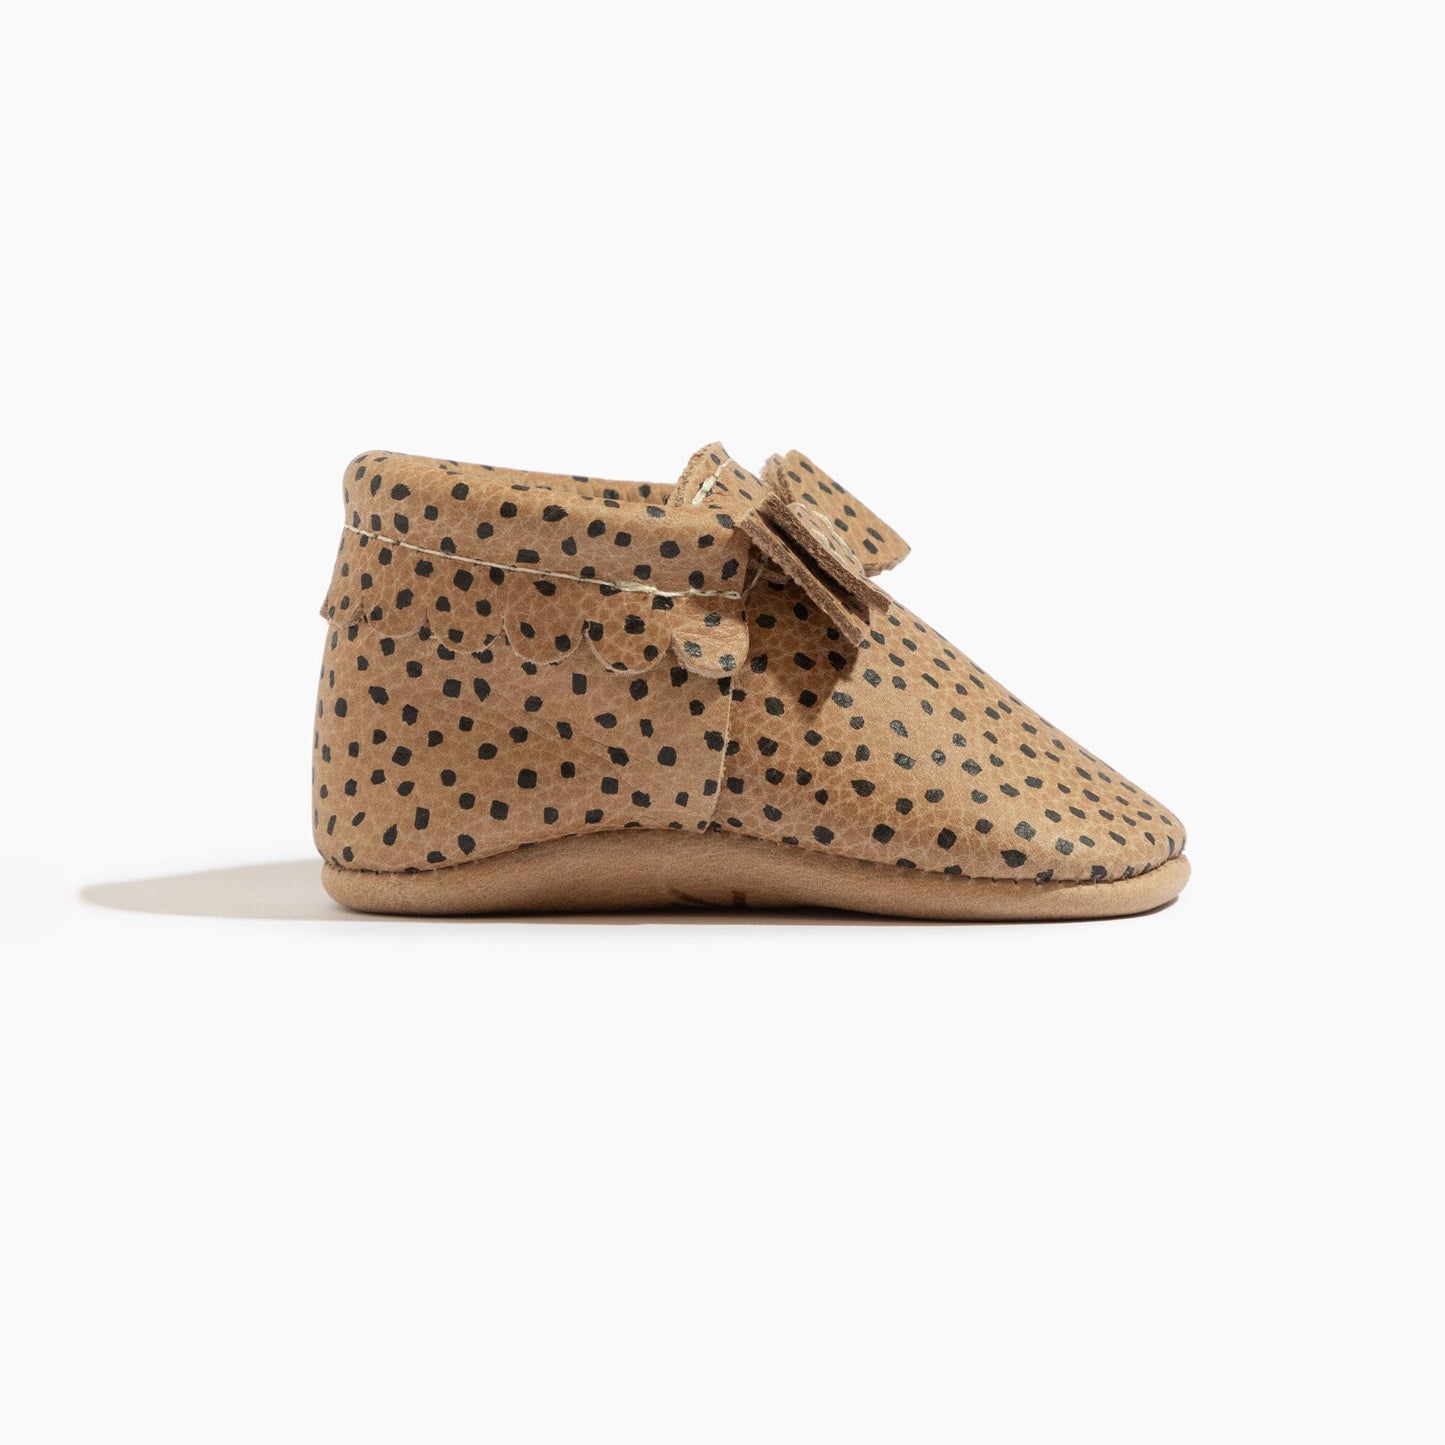 Almond Speckles Bow Baby Shoe Bow Mocc Soft Sole 